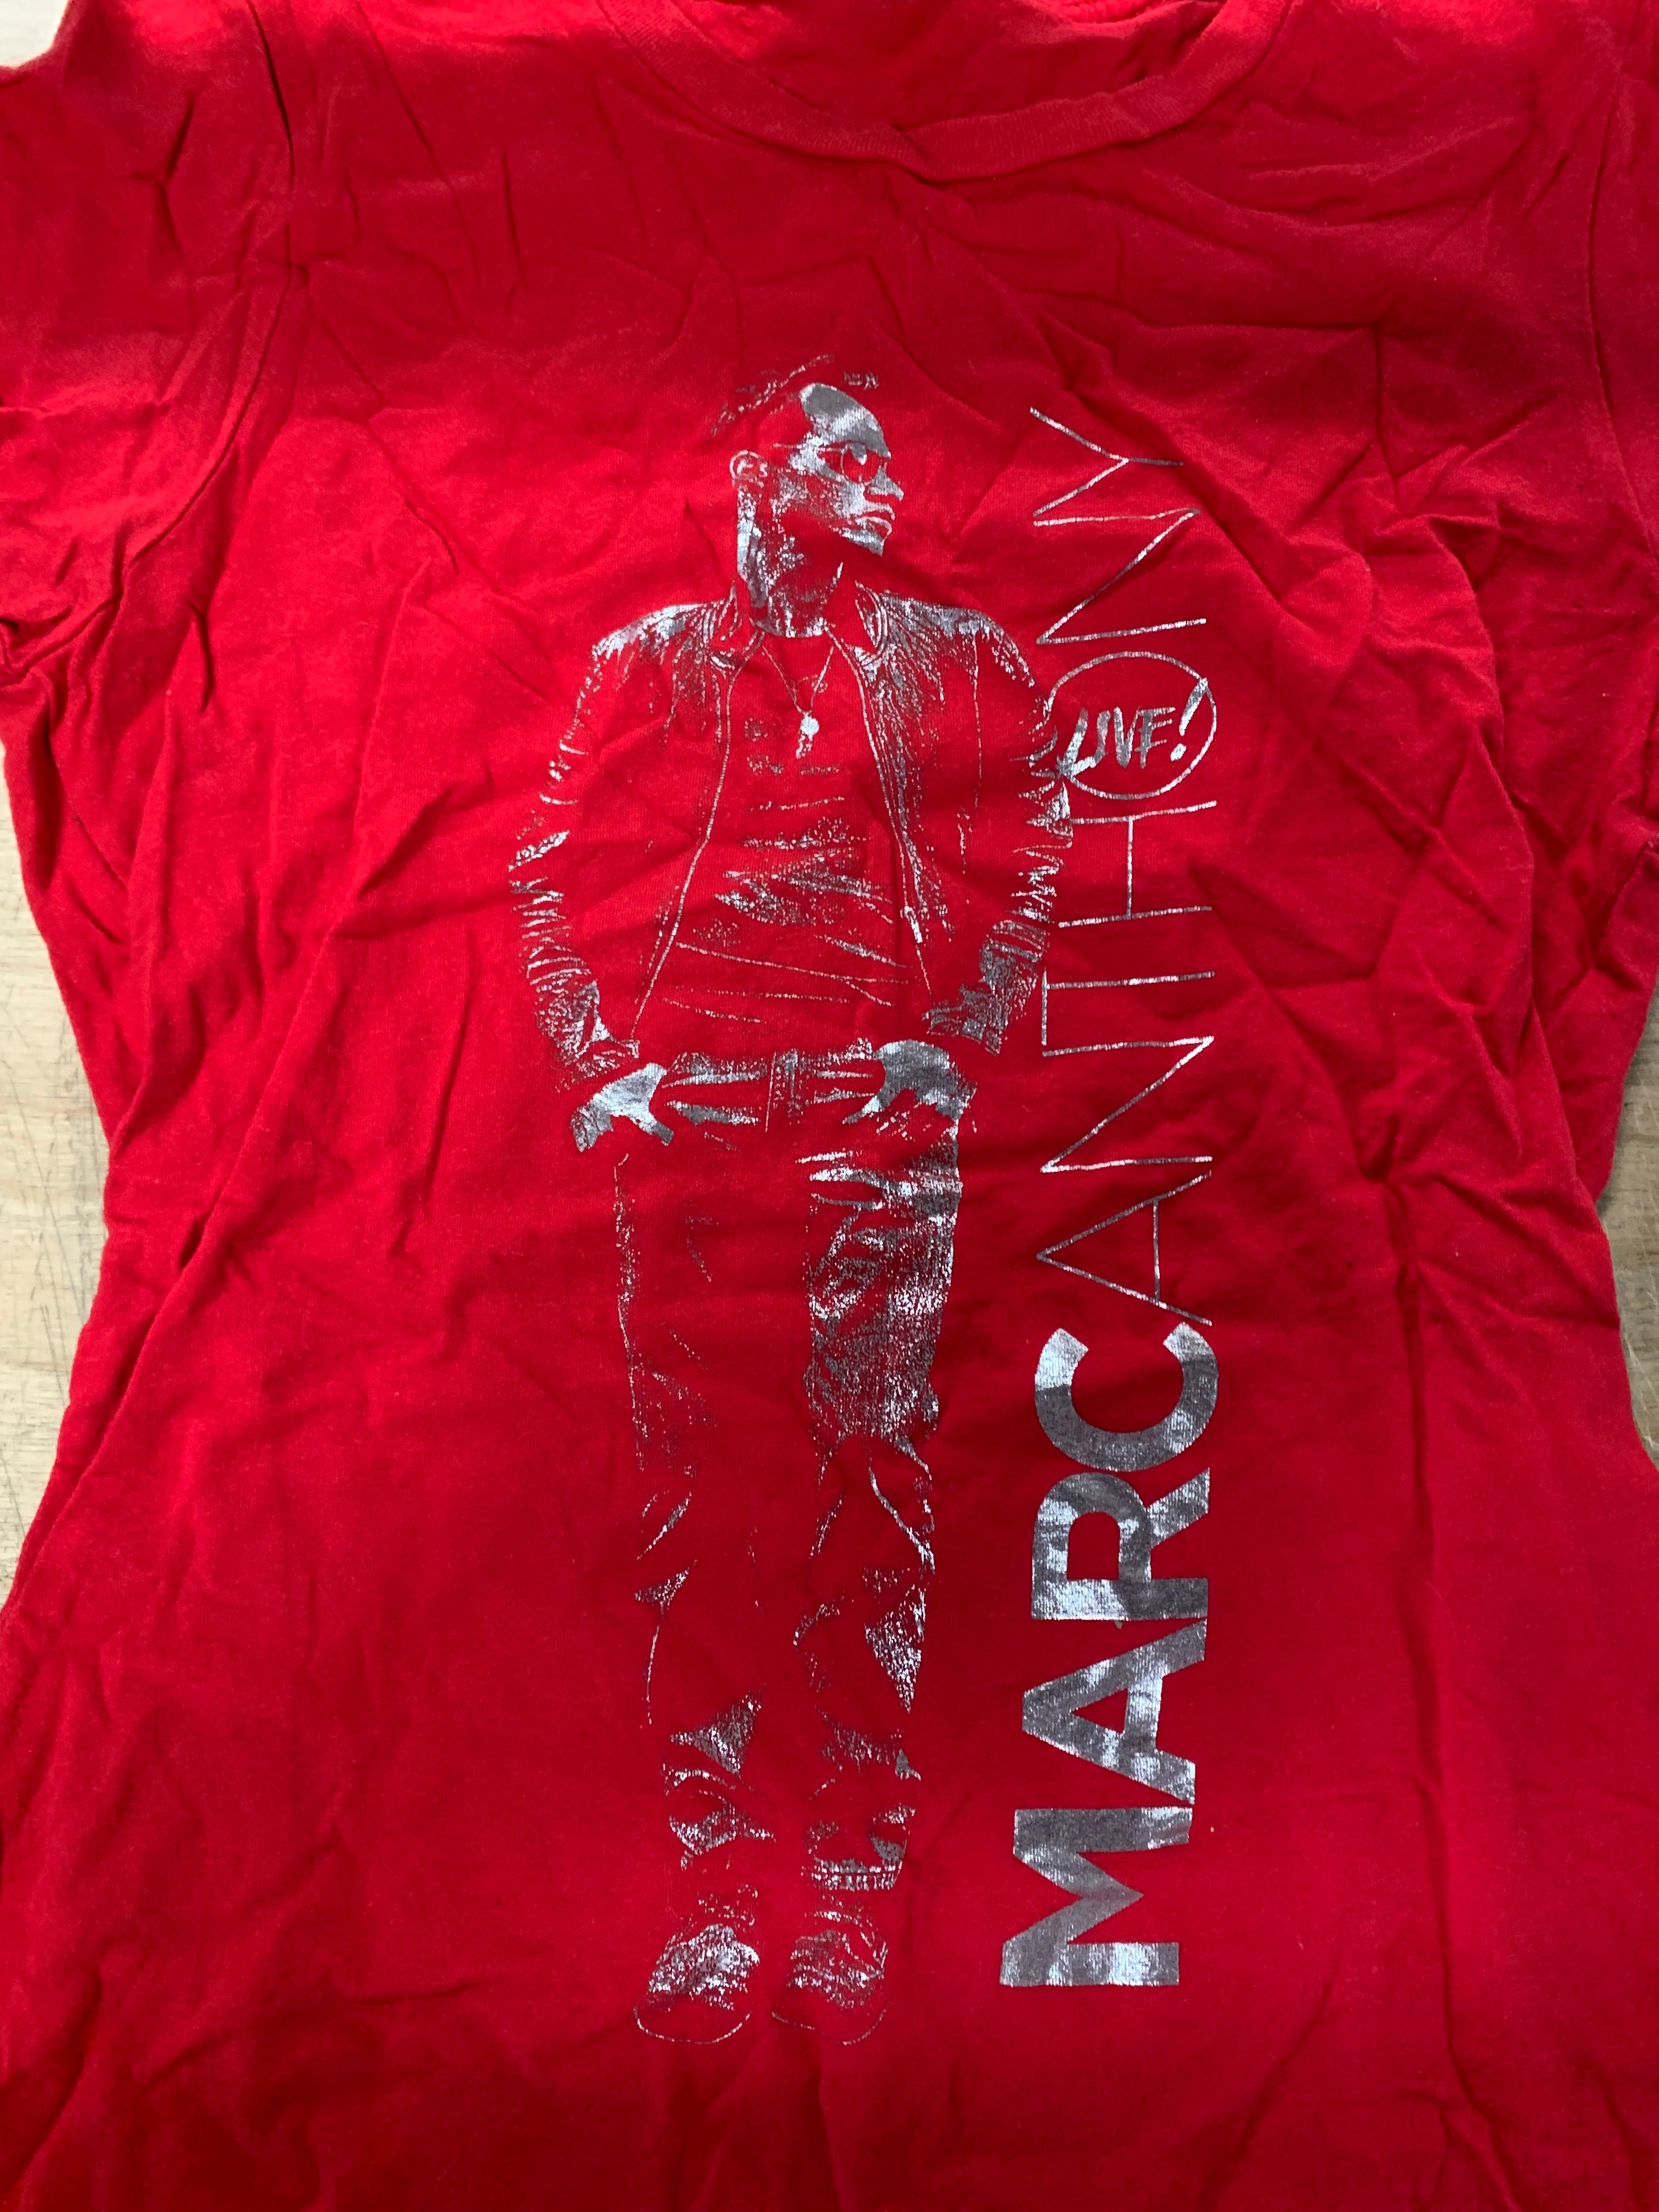 Marc Anthony Live T-Shirt, Red, Women's S